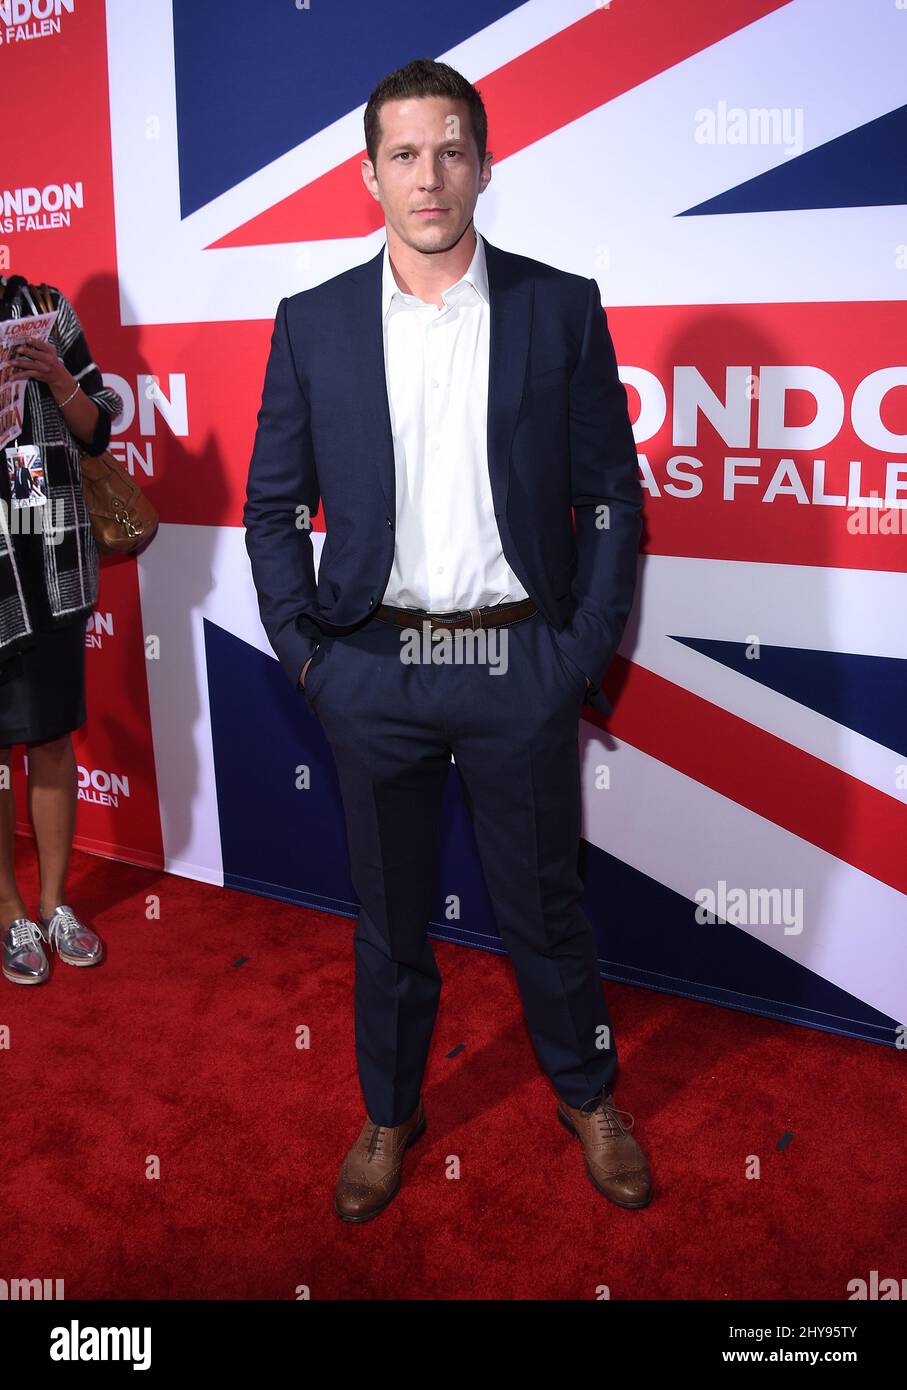 Joe Fidler attends the premiere of London Has Fallen at the Arclight Cinemas in Los Angeles, CA, USA, on March 1, 2016. Stock Photo